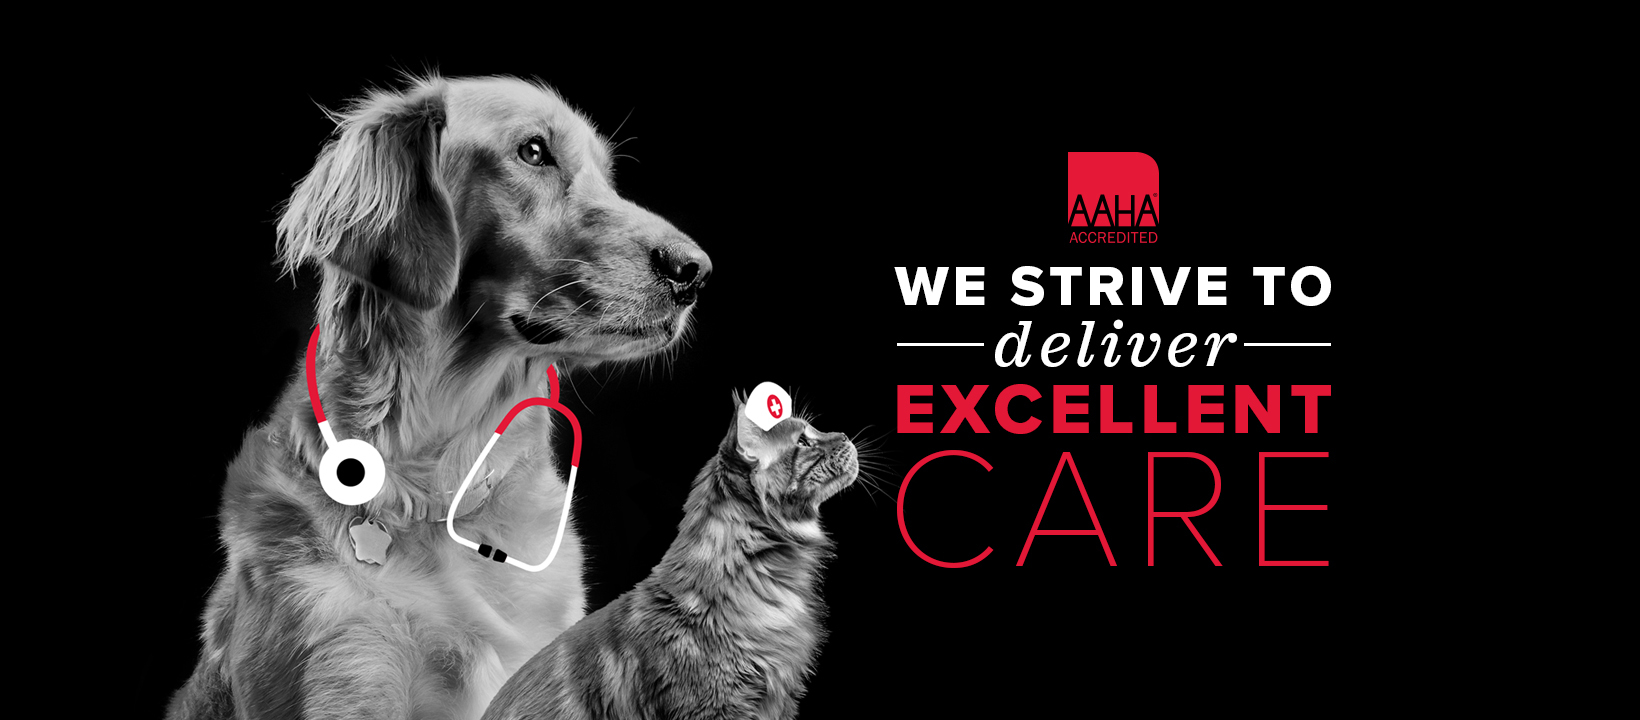 Doctor dog and nurse cat looking at the AAHA logo and text on black background that says "we strive to deliver excellent care"